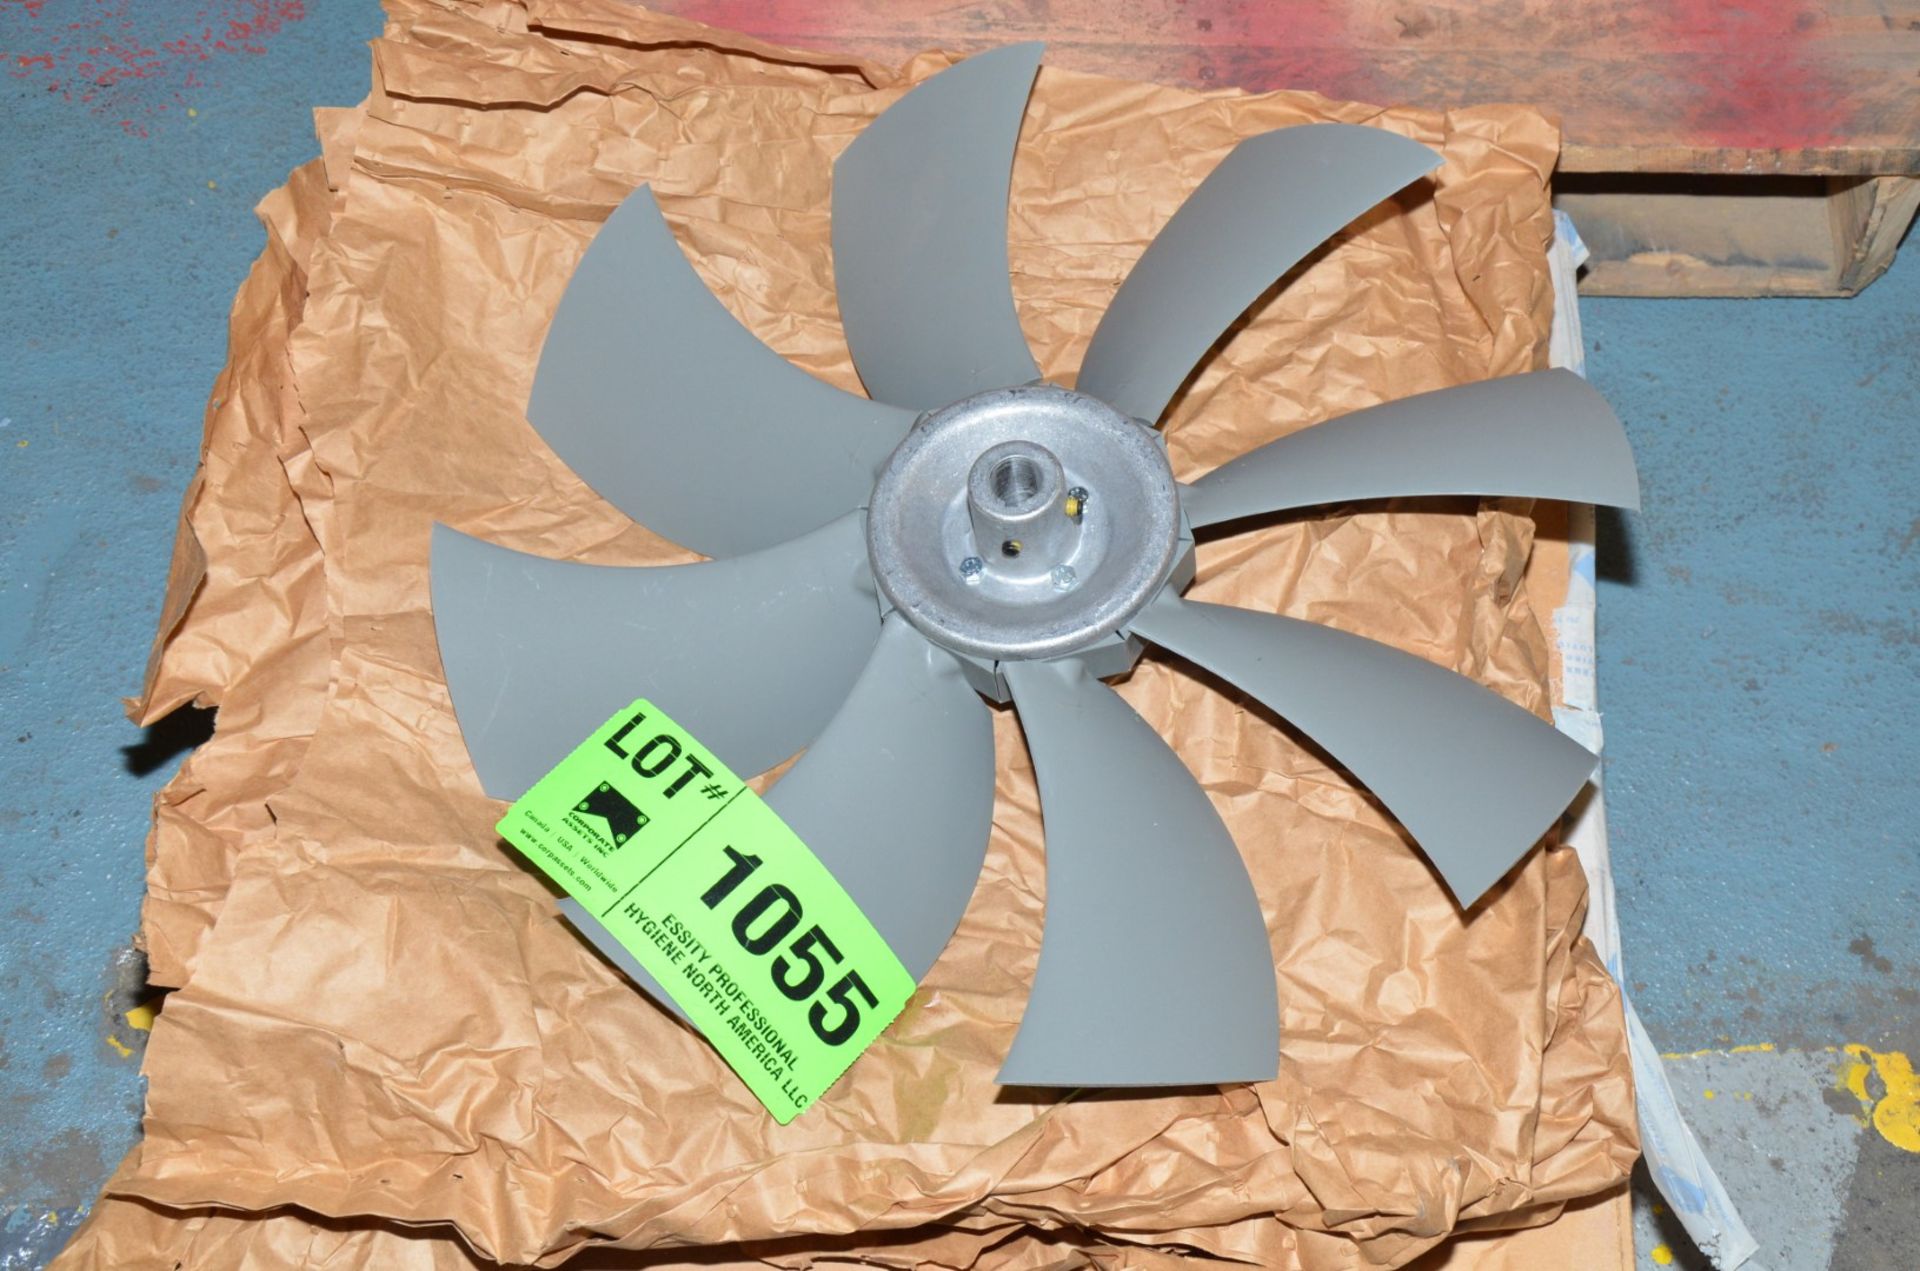 SPARE SONICAIRE FAN BLADE [RIGGING FEE FOR LOT #1055 - $25 USD PLUS APPLICABLE TAXES]